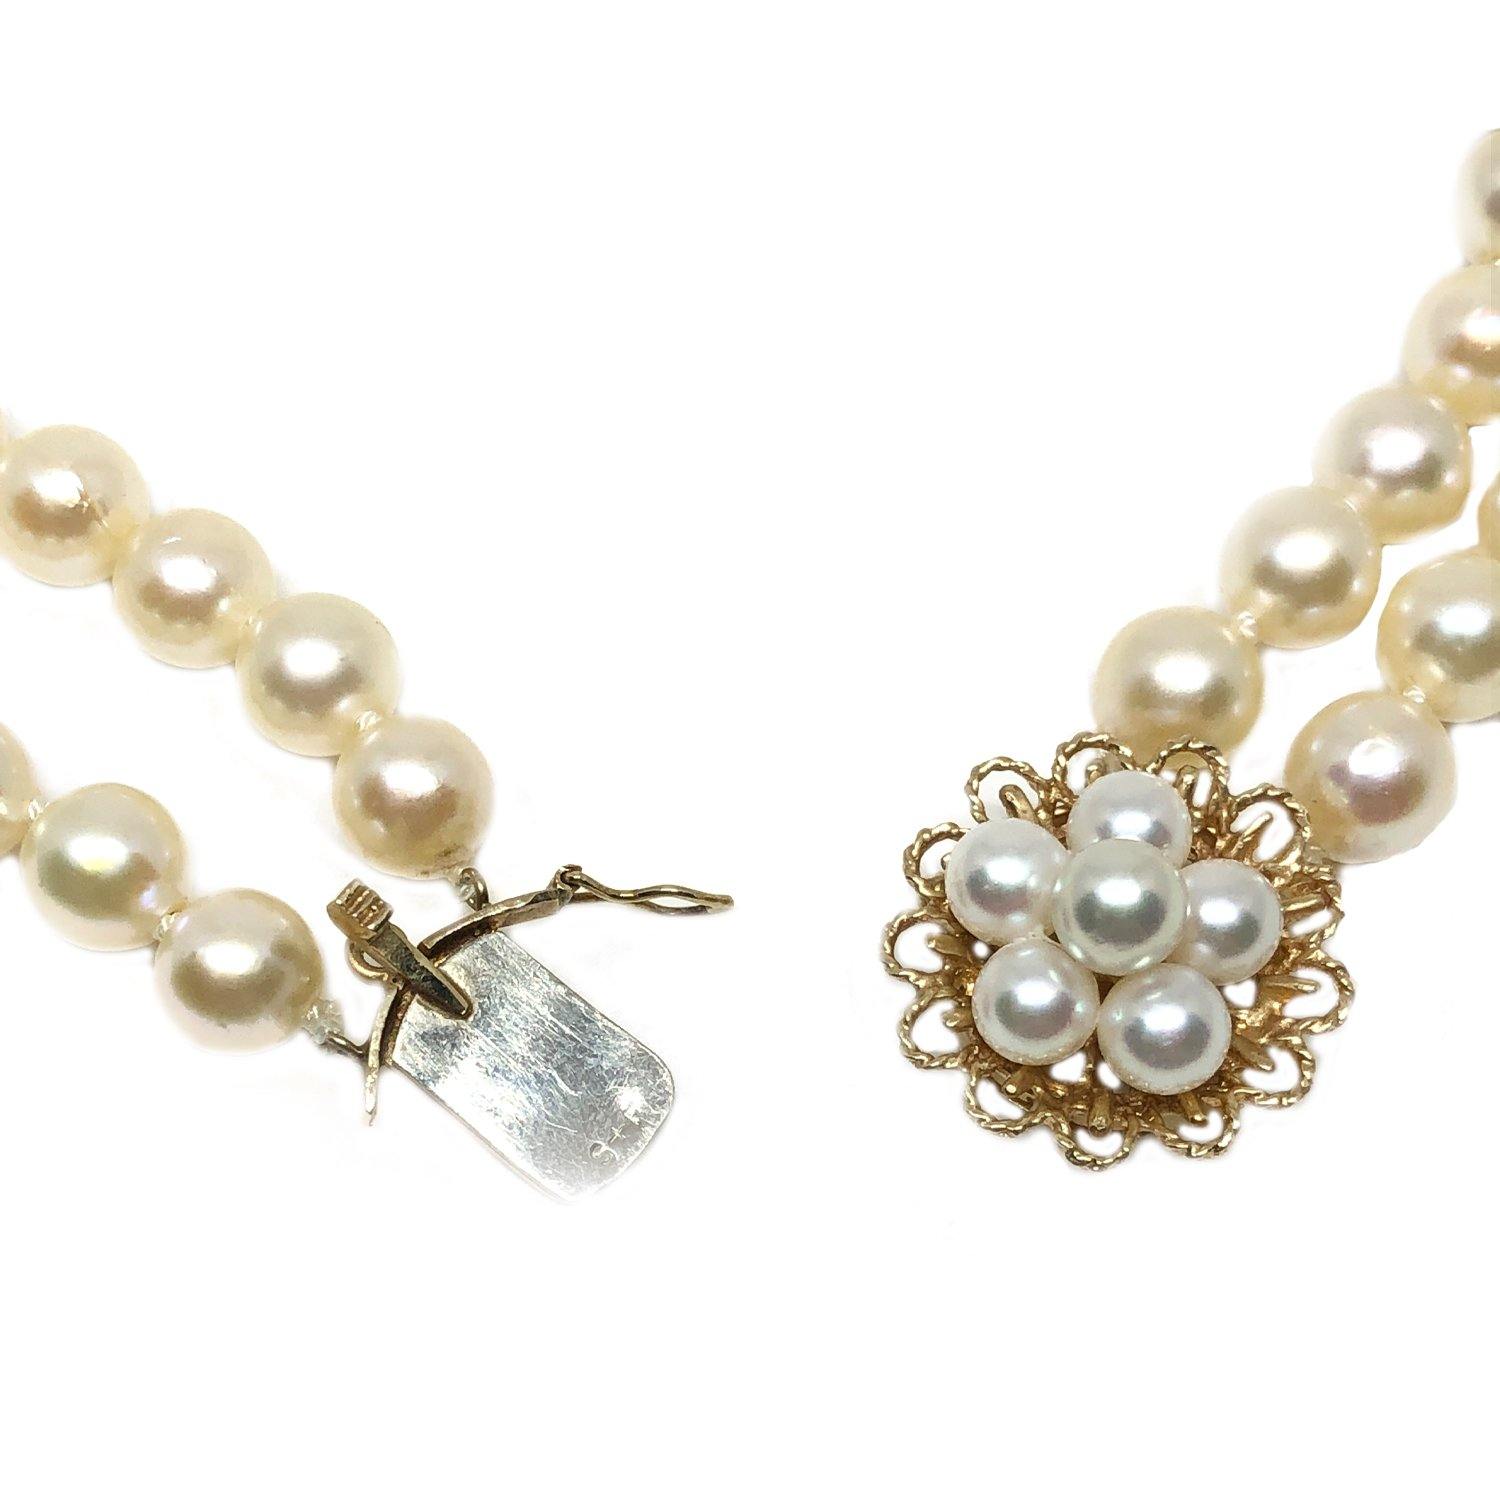 Double Strand Japanese Saltwater Cultured Akoya Pearl Necklace - 14K Yellow Gold 15.50 & 16.75 Inch